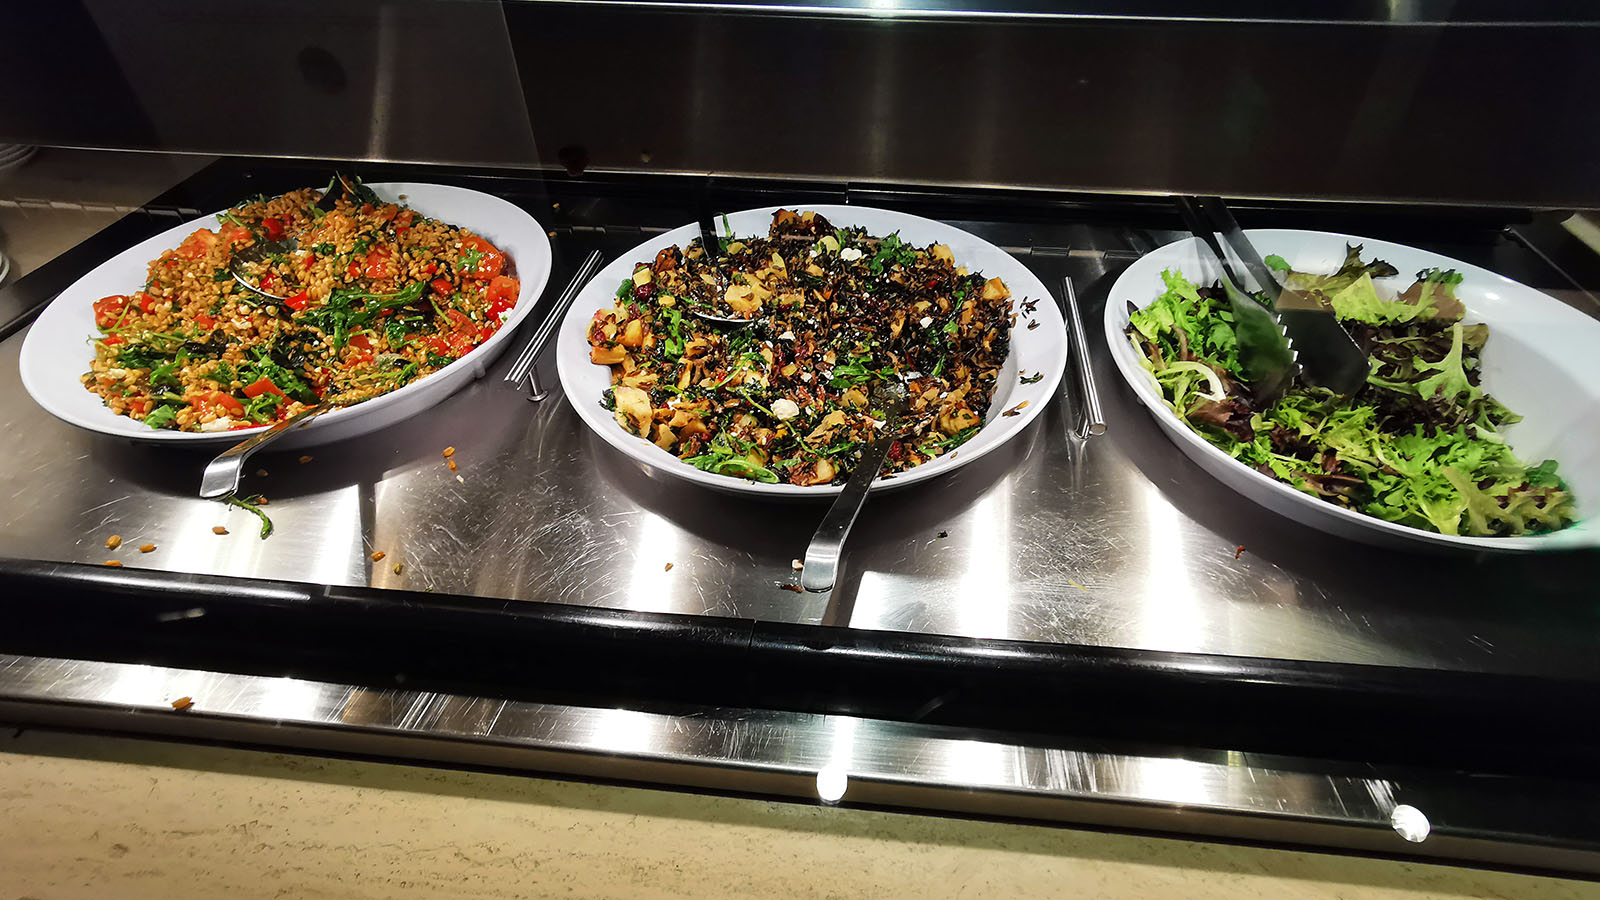 Fresh food in the Qantas International Business Lounge in Los Angeles